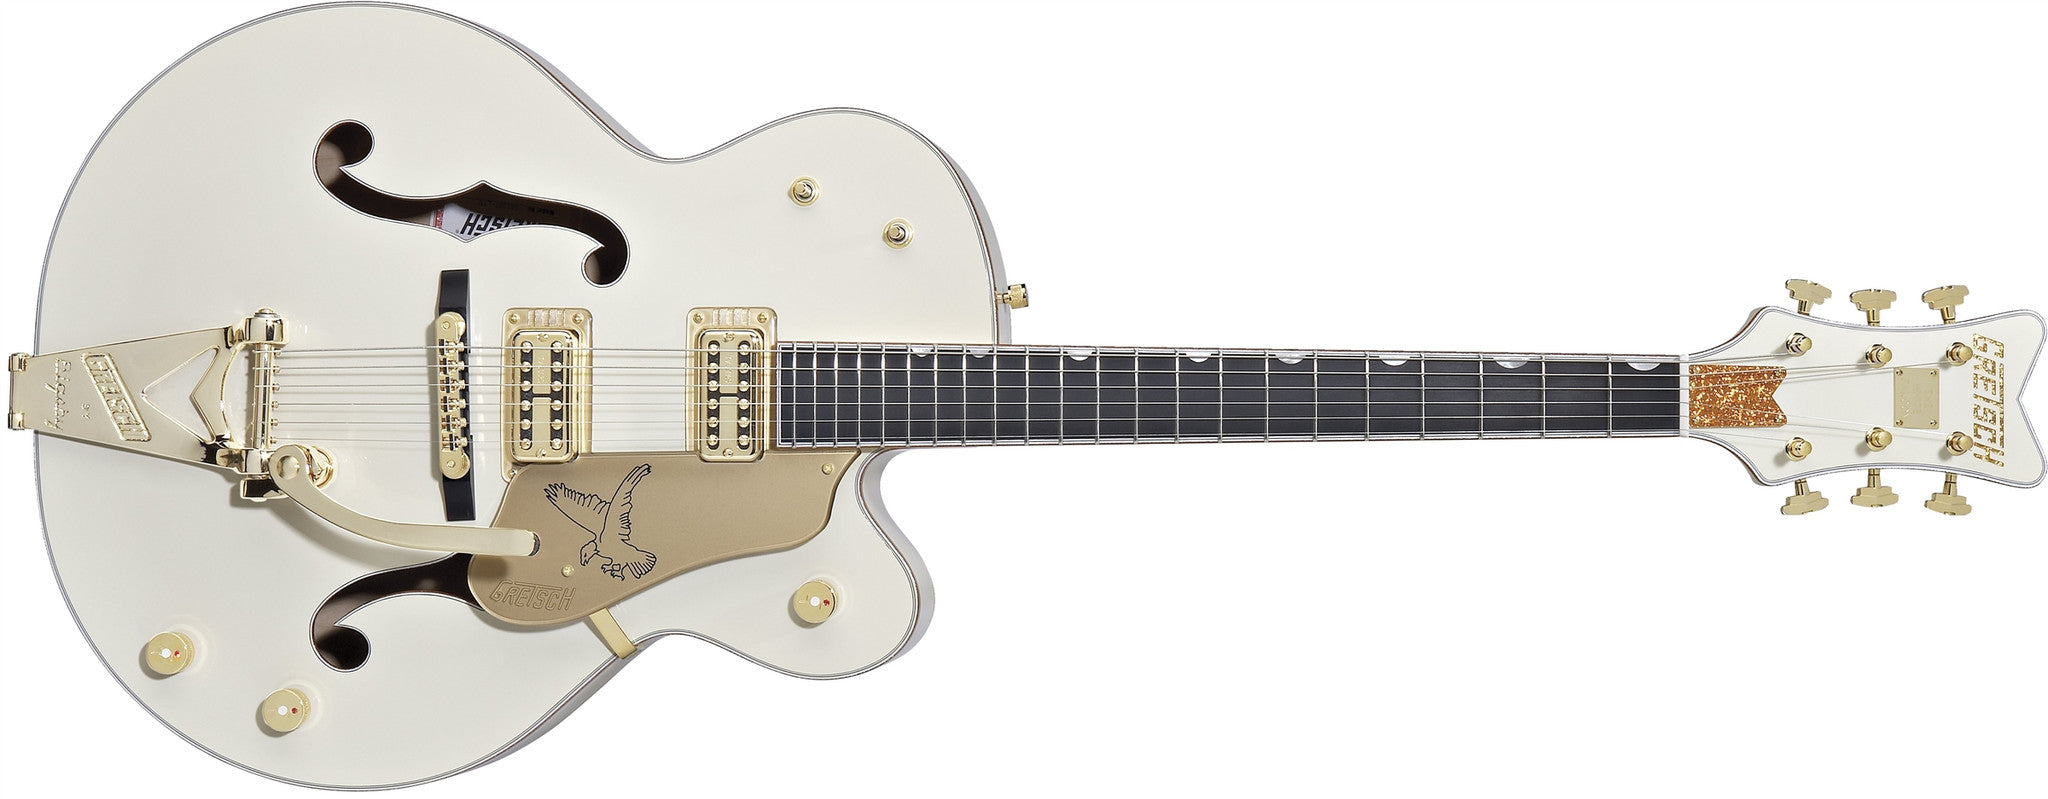 Gretsch G6136T-LTV White Falcon,  Ebony Fingerboard, Vintage White Laquer, with Bigsby 2401413805 - L.A. Music - Canada's Favourite Music Store!